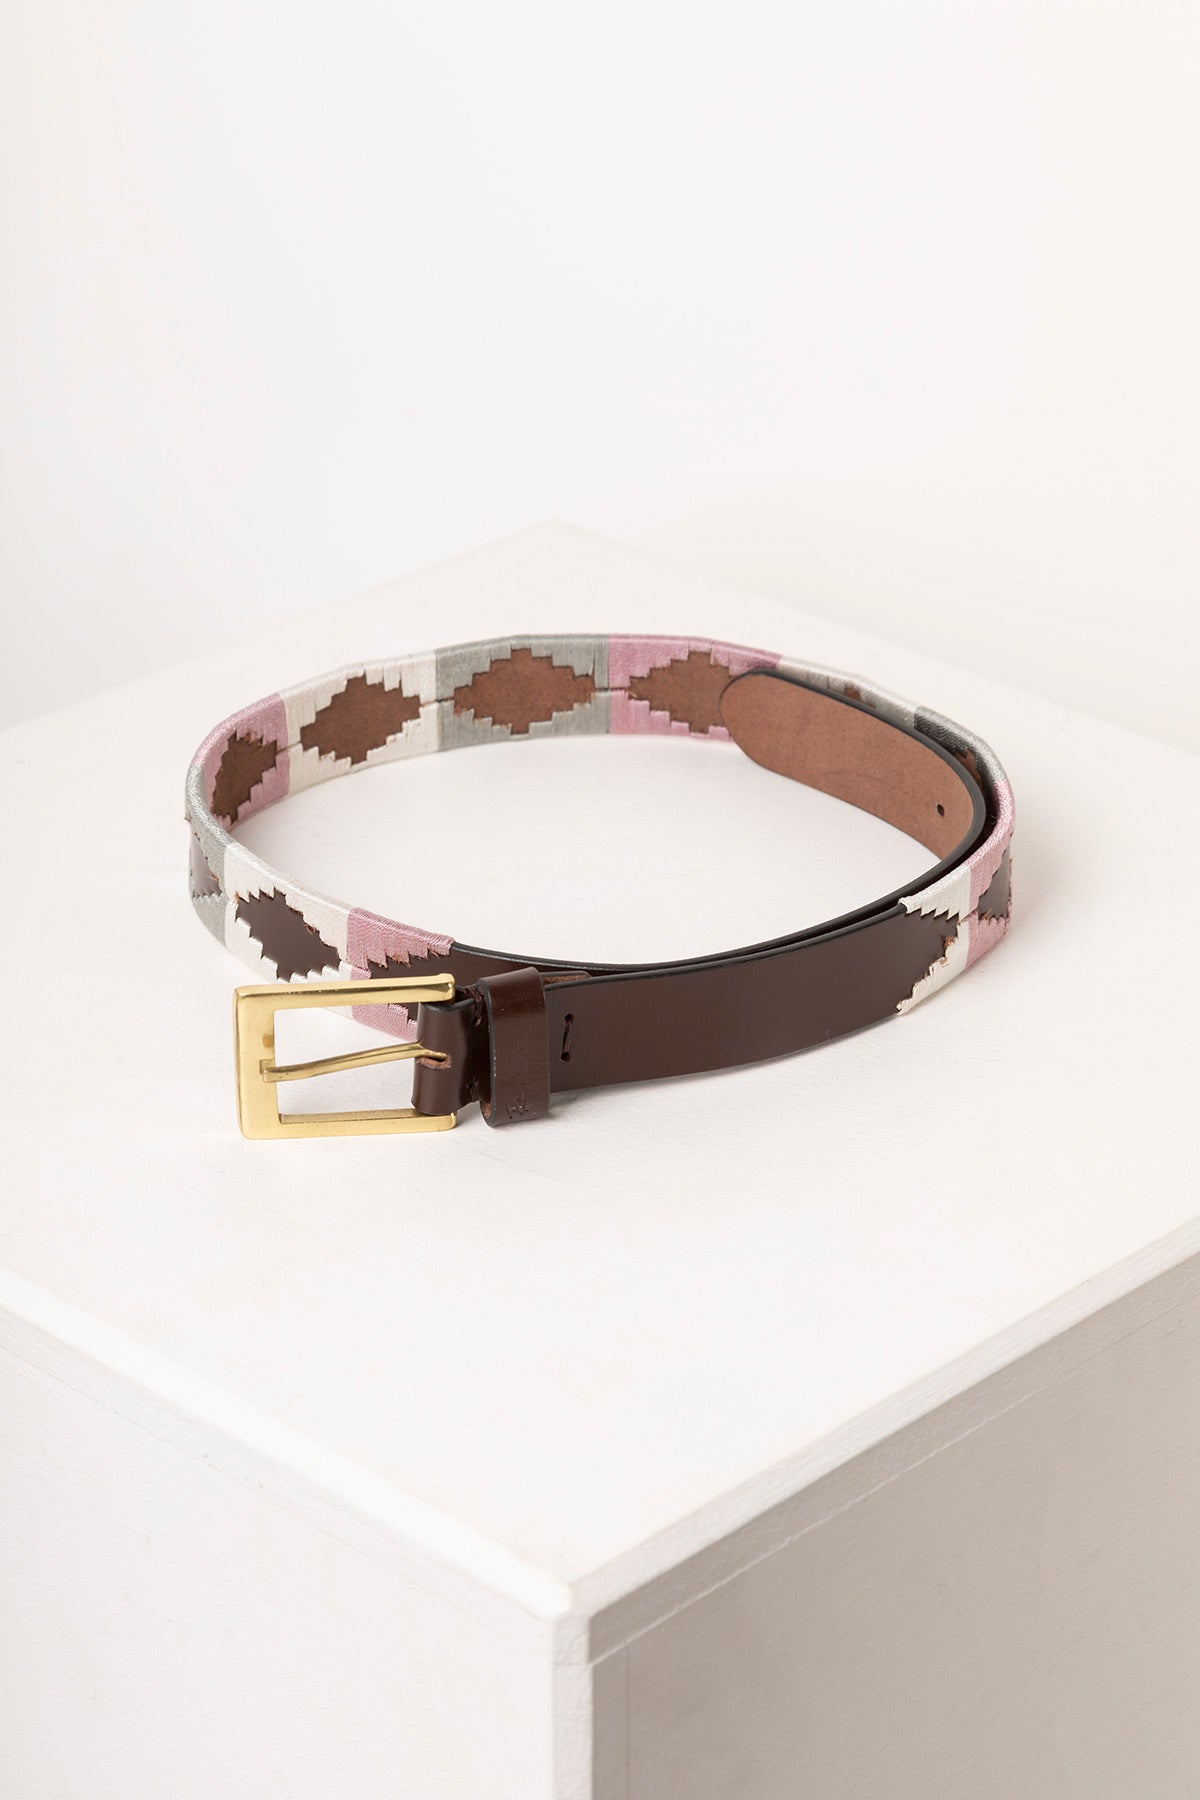 Polo Belt UK | Mens and Womens Polo Belts | Rydale